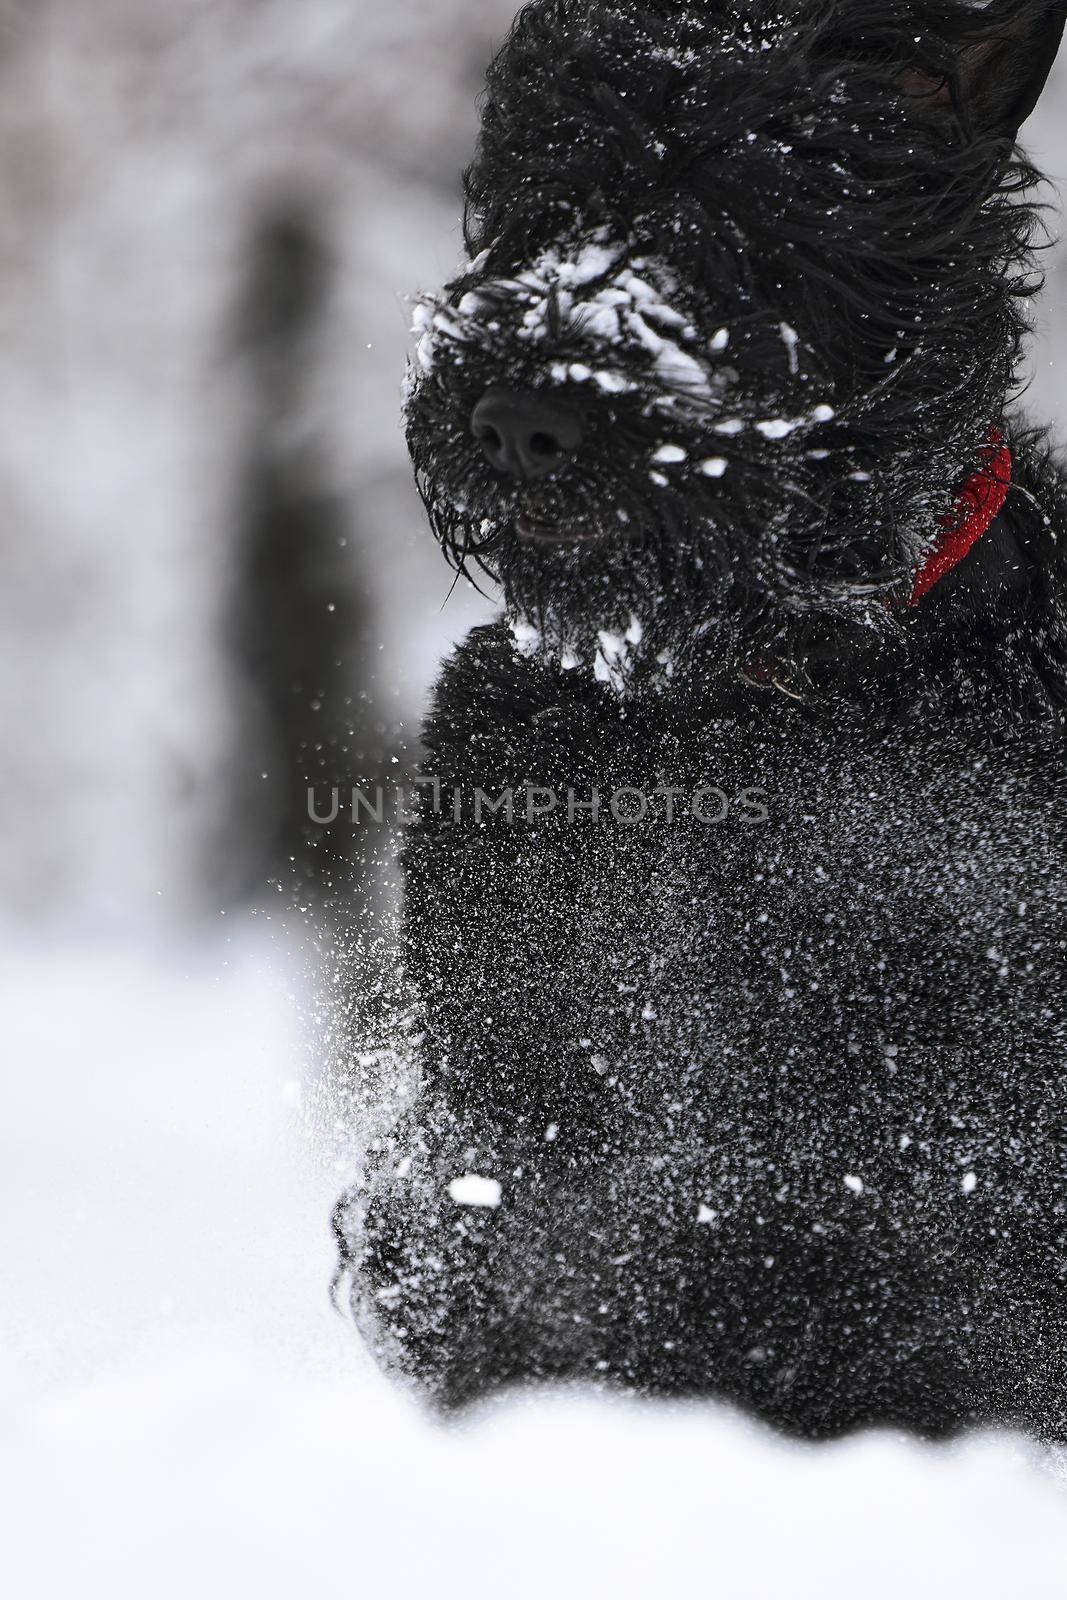 Happy black long-haired dog in the snow. The big dog is glad of the snow. A black dog in the snow. Russian black terrier walking in a snowy park. What happens if you walk your dog in winter by EvgeniyQW